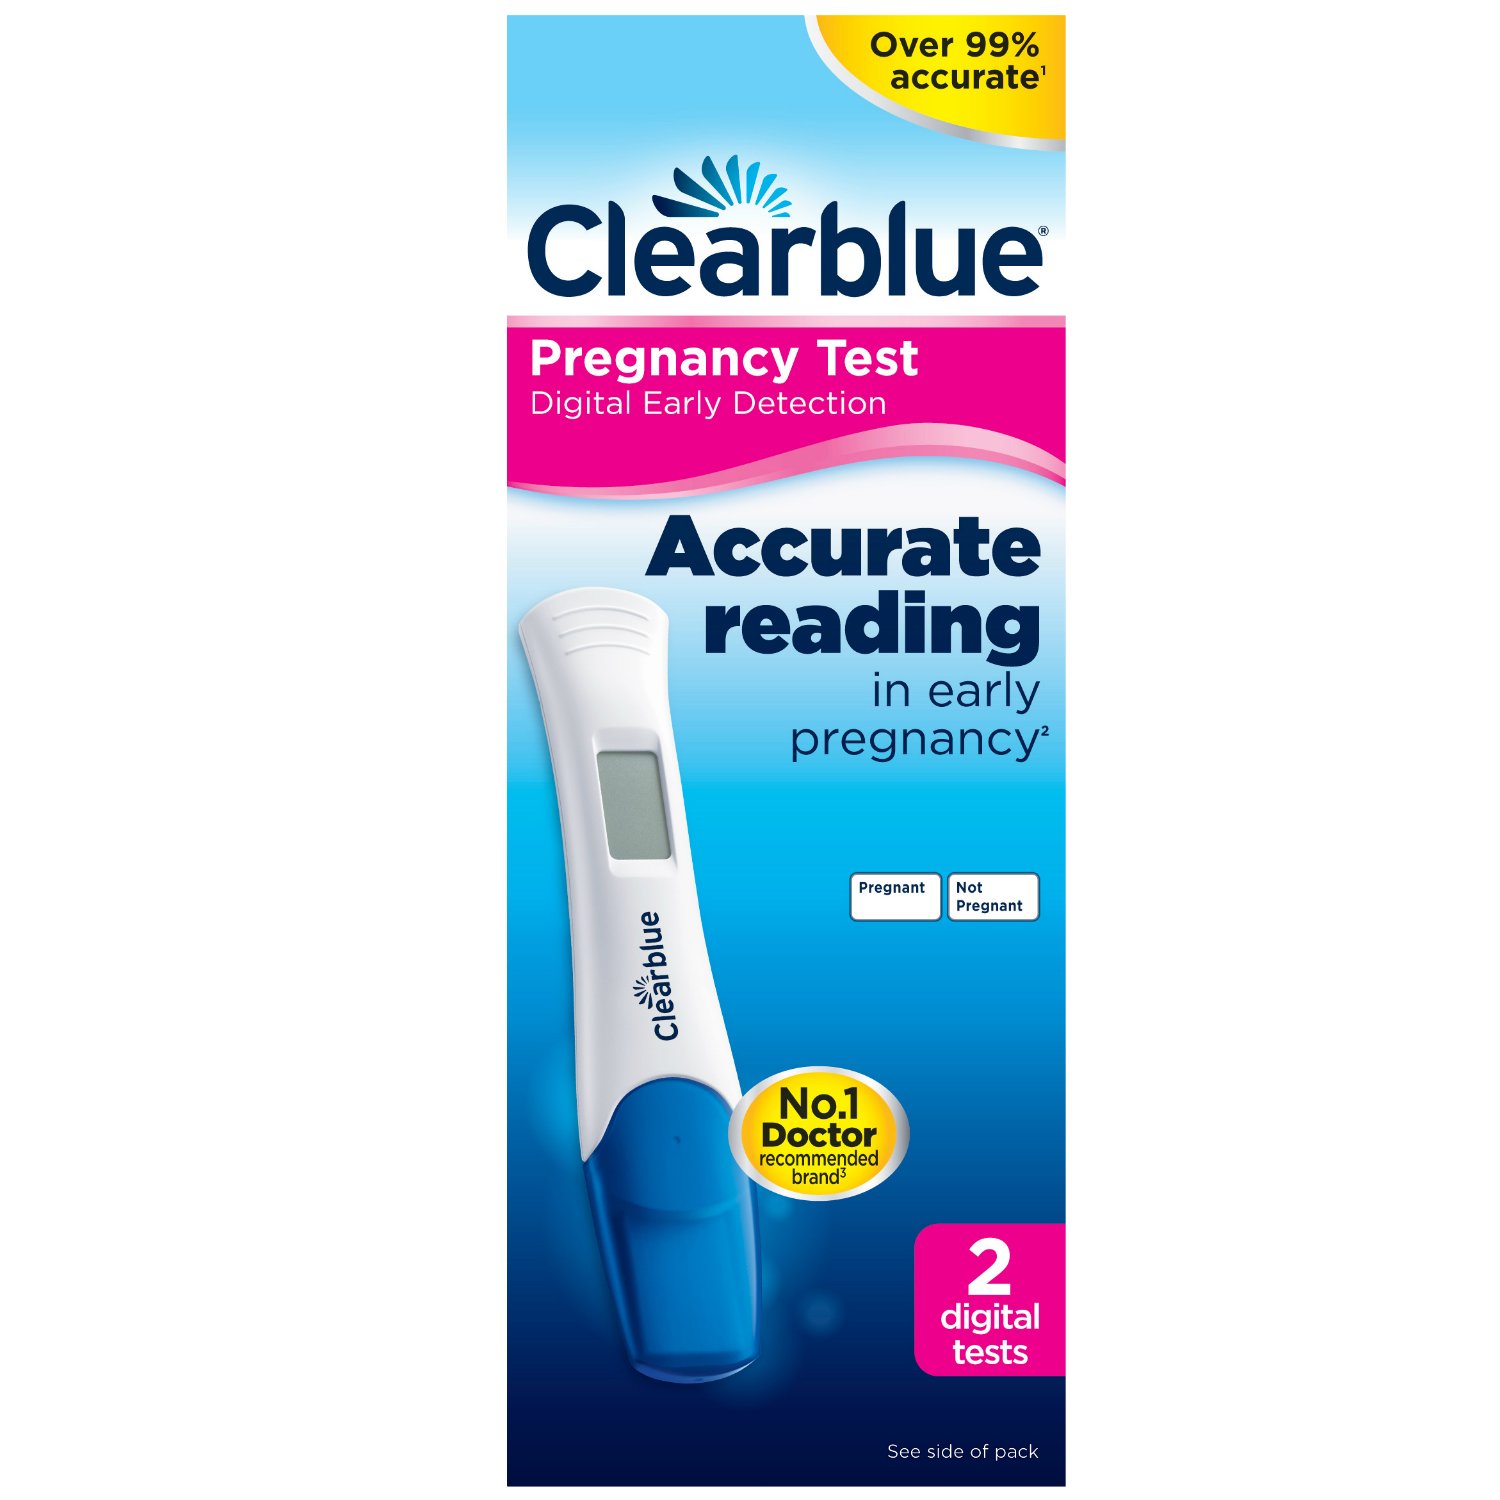 Clearblue Pregnancy Test 2 Digital Early Detection Tests Over 99% ...